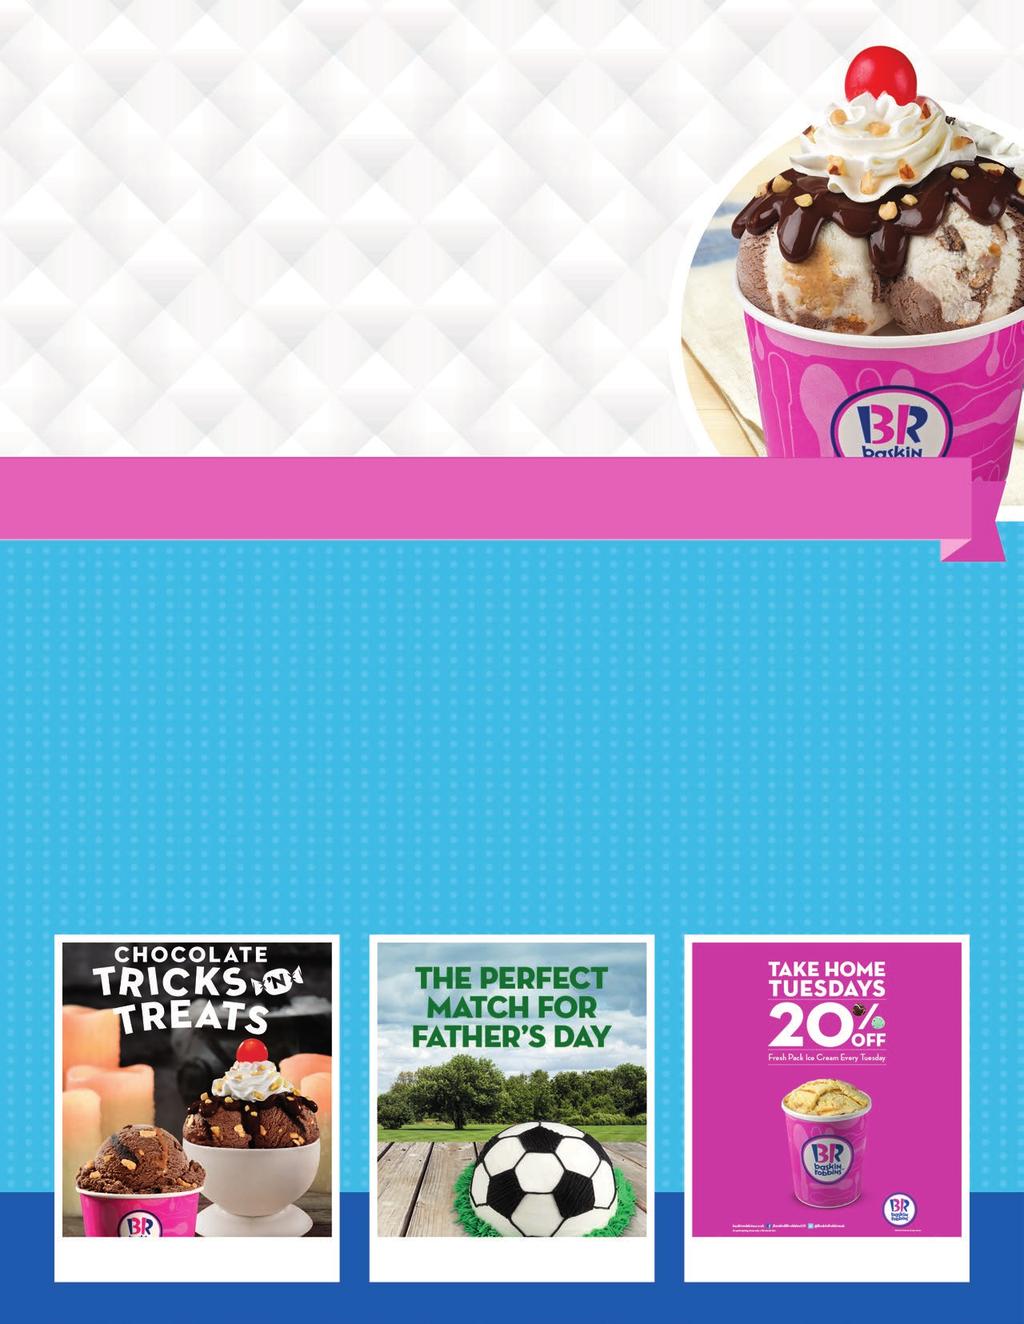 here s the scoop There are plenty of reasons to invest with a brand as fun as Baskin-Robbins. Here s a taste of why entrepreneurs are considering Baskin-Robbins as their franchise of choice.